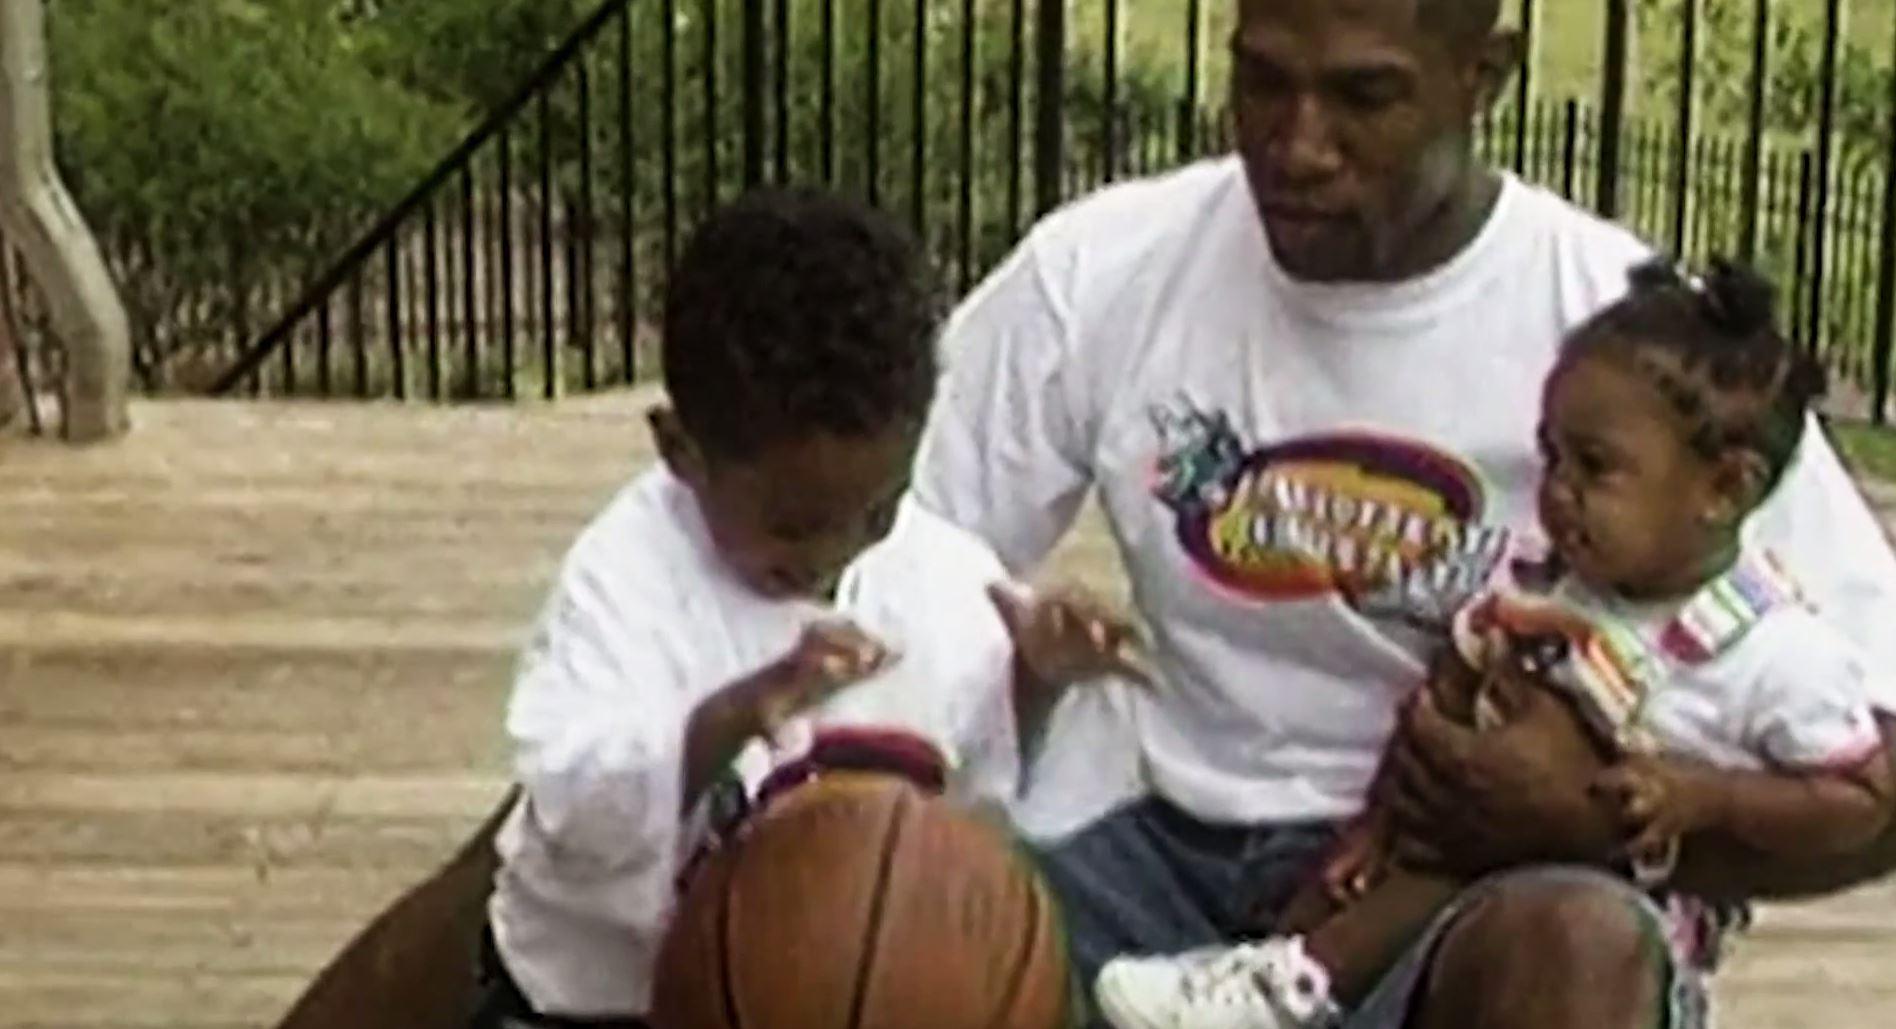 Bobby Phills: The Story Of His Untimely Death To His Son's Inspiring  Journey To Make The NBA - Fadeaway World